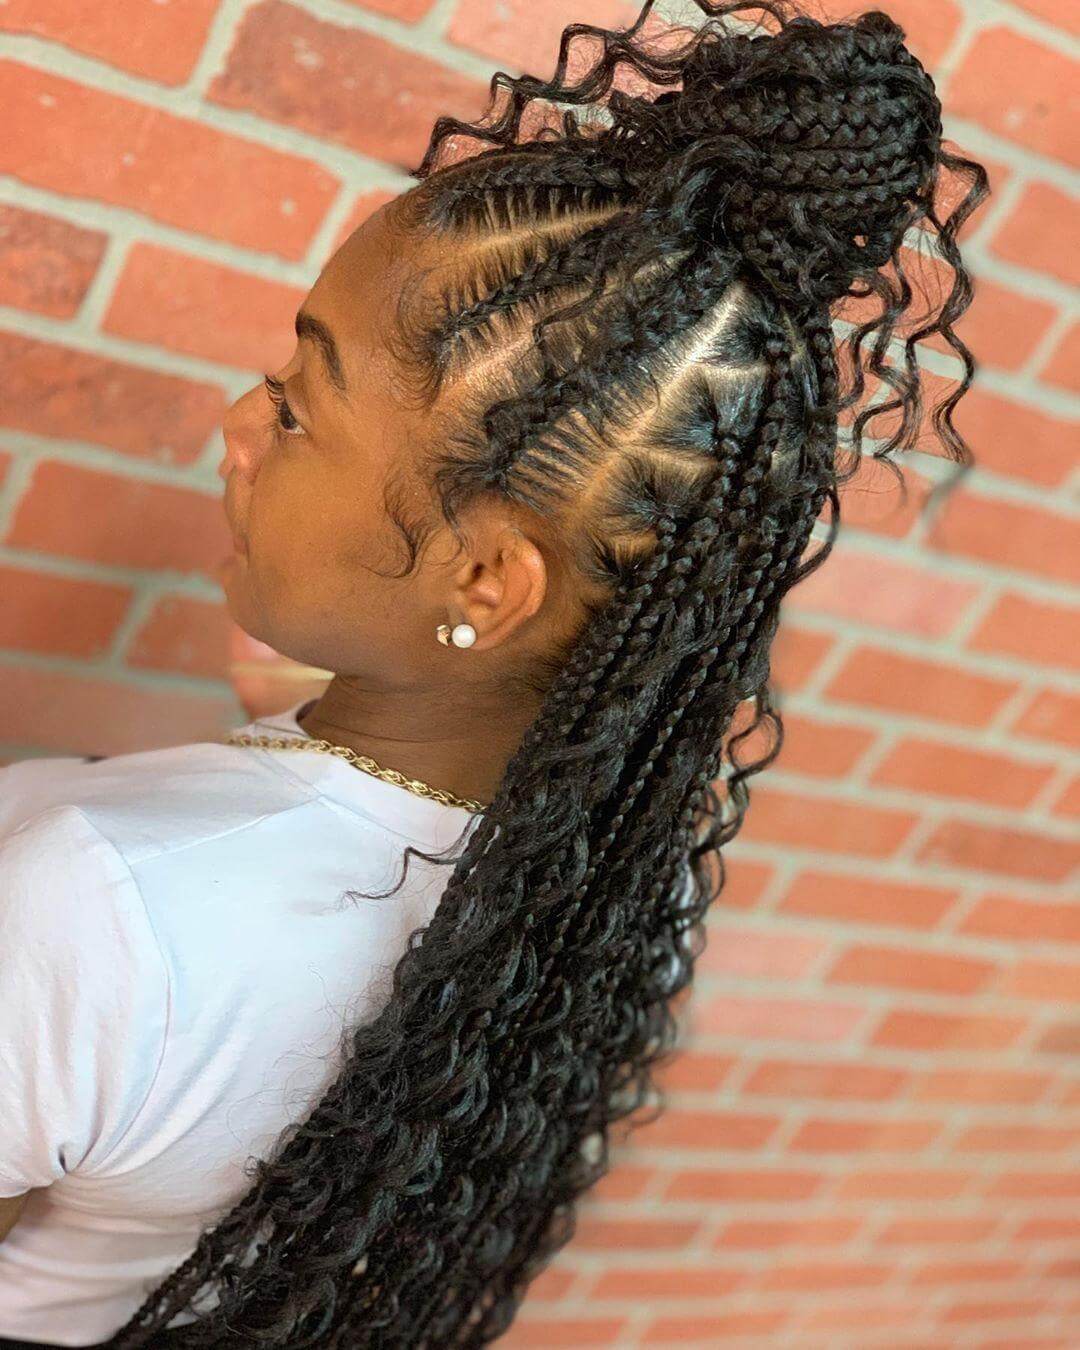 14+ Most Popular 10 Year Old Hairstyles You'll See in 2021